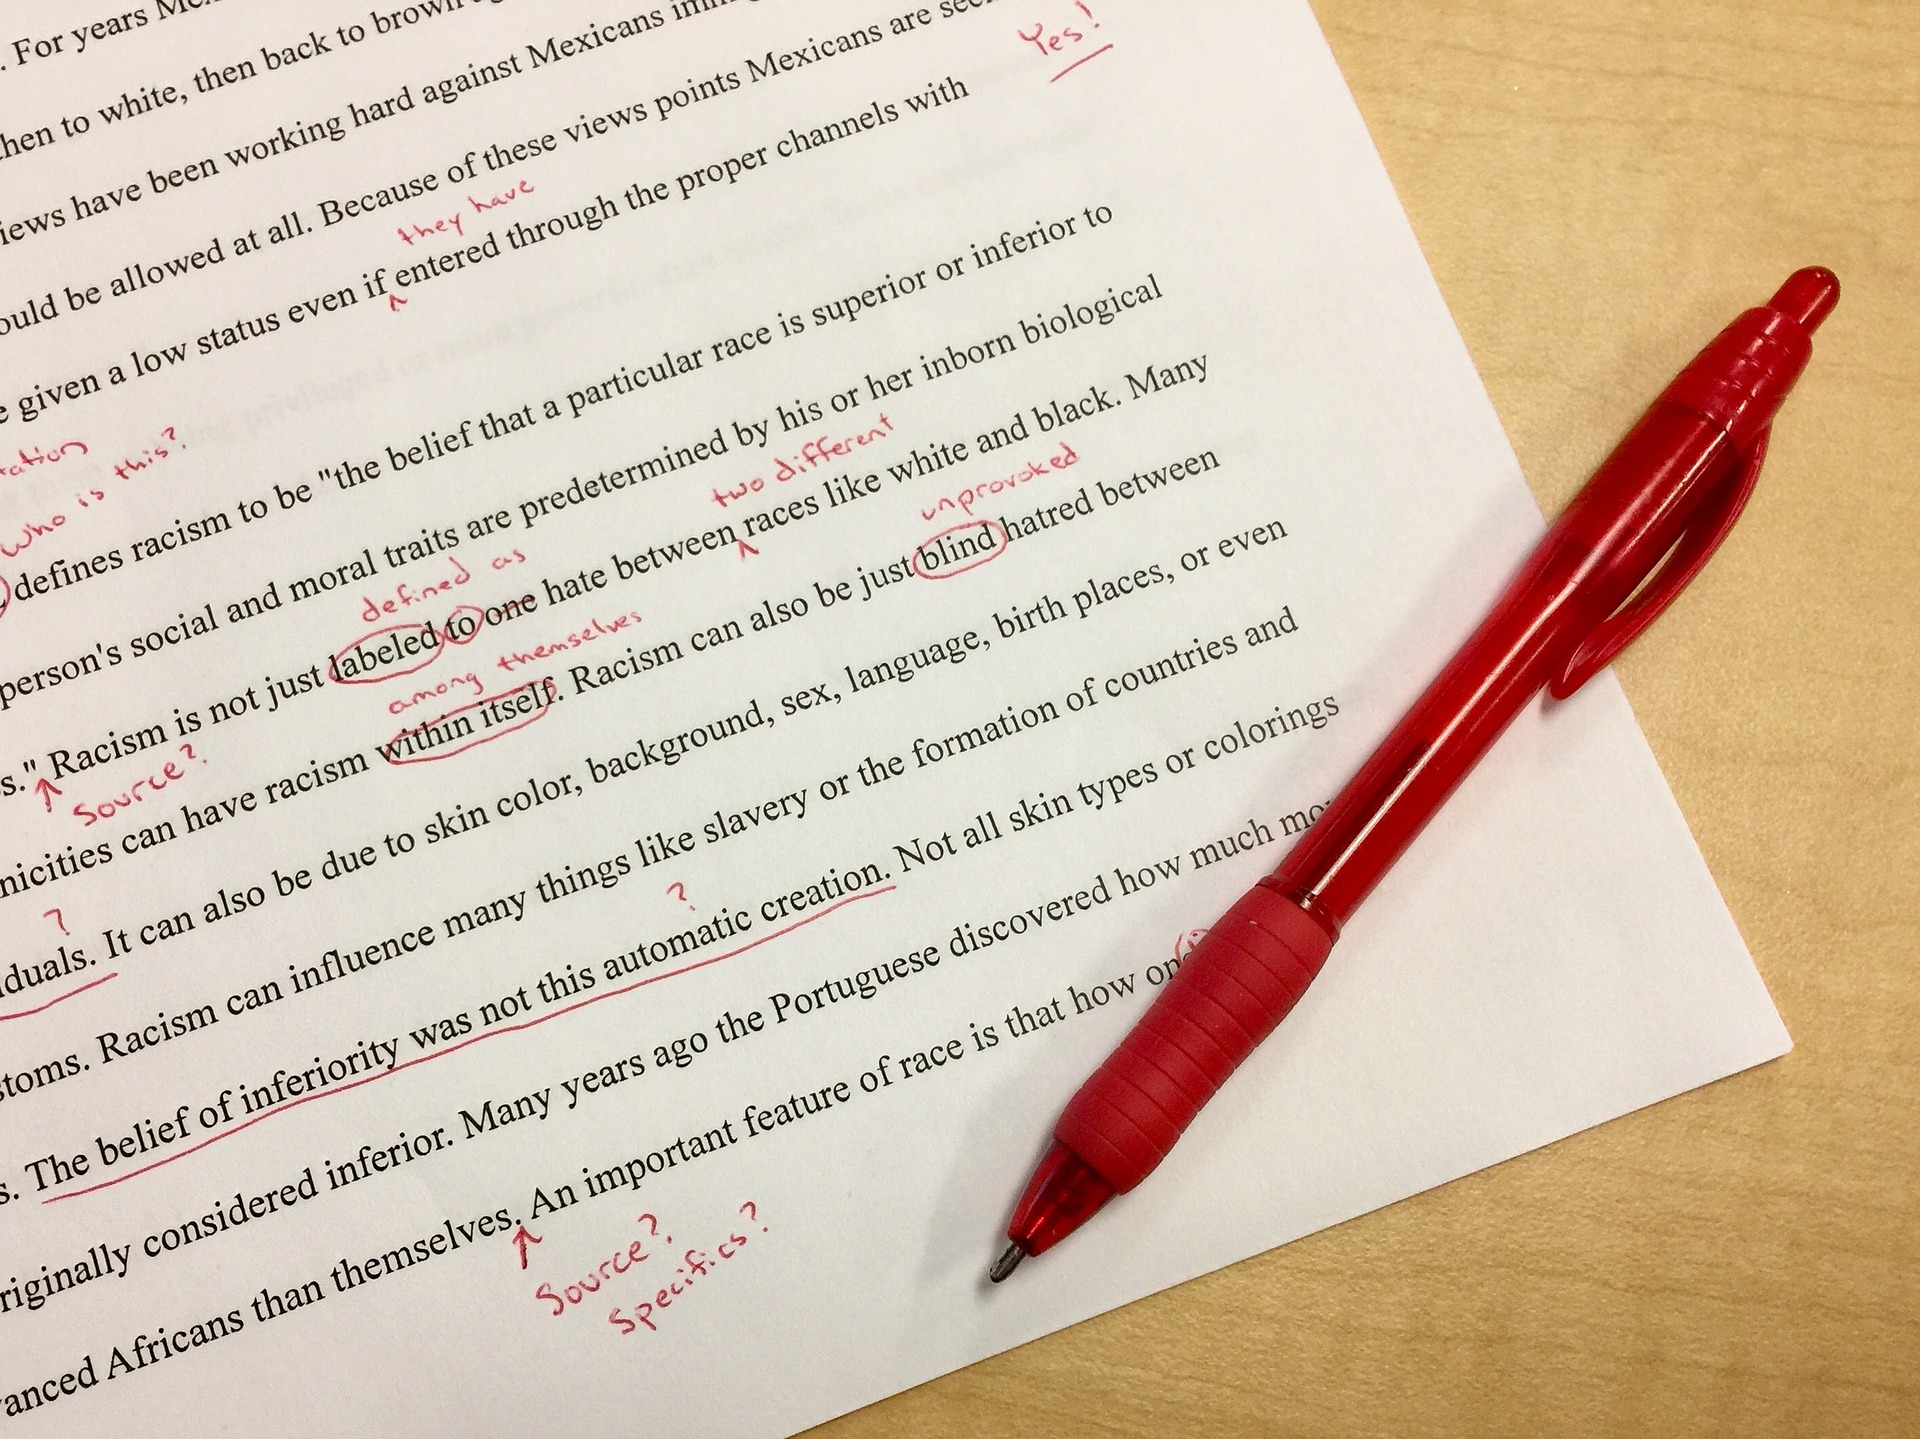 A pen on a document that has many red revisions